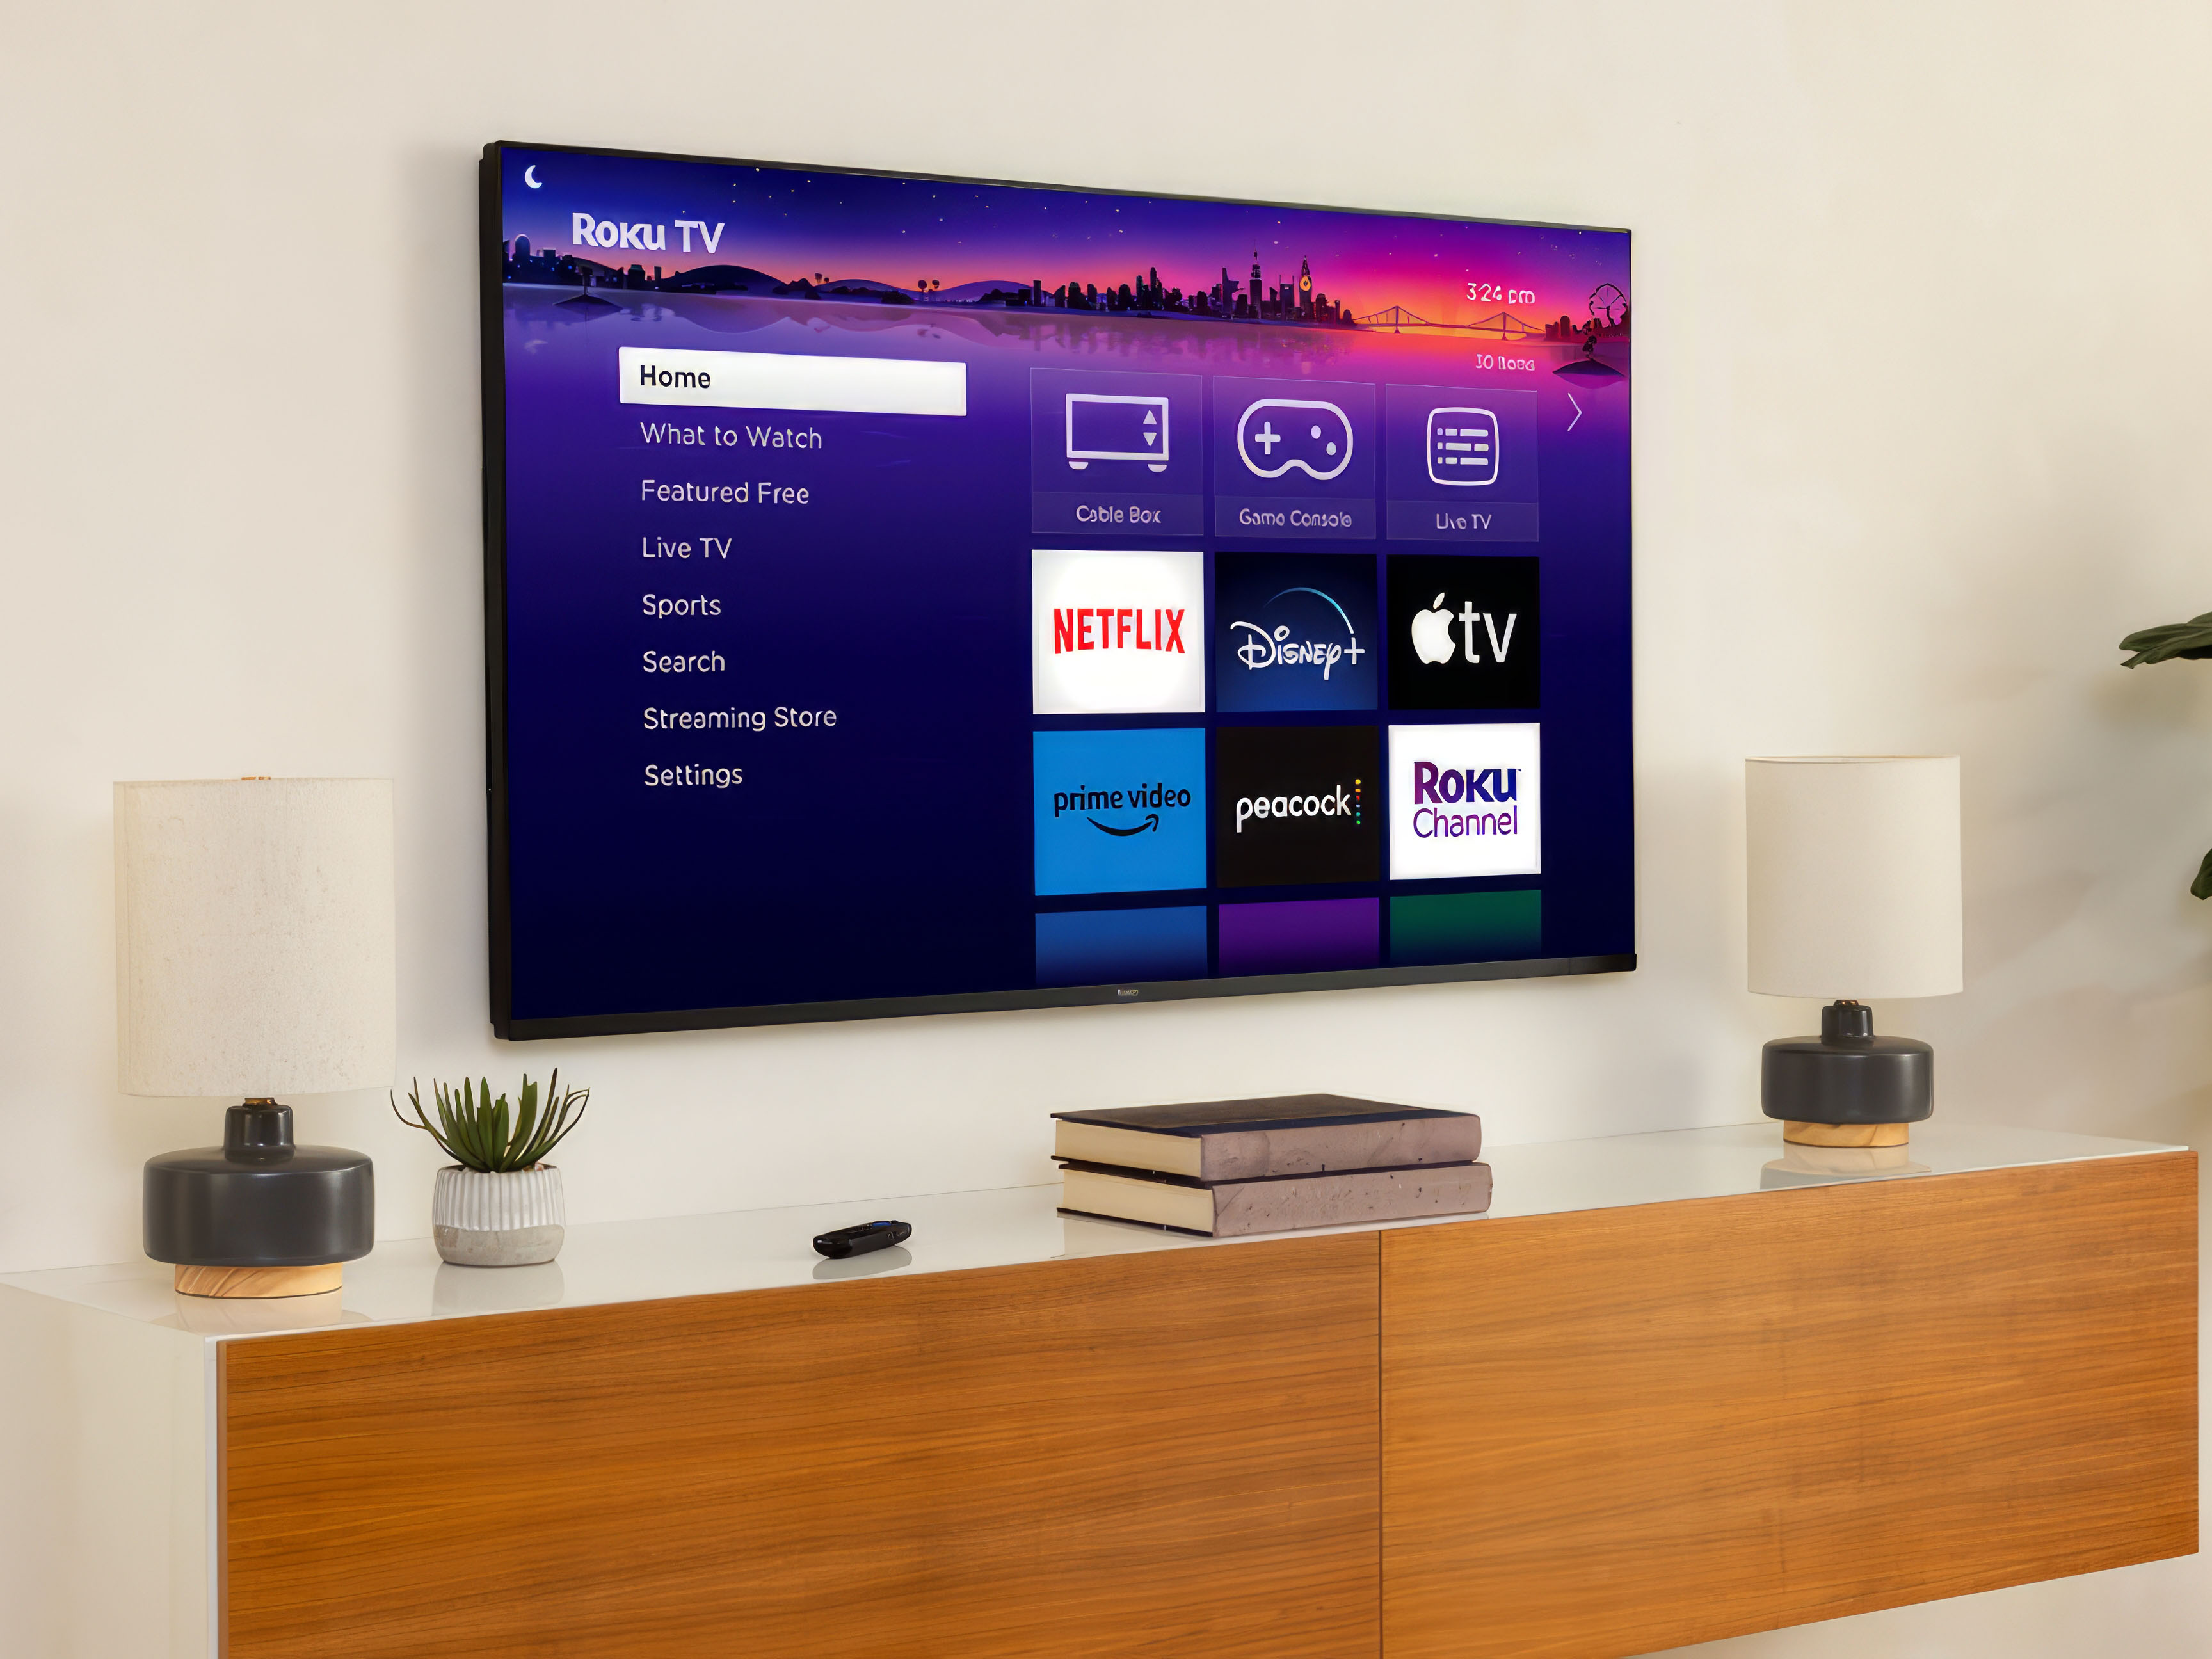 The Roku Pro Series television seen in a press image.